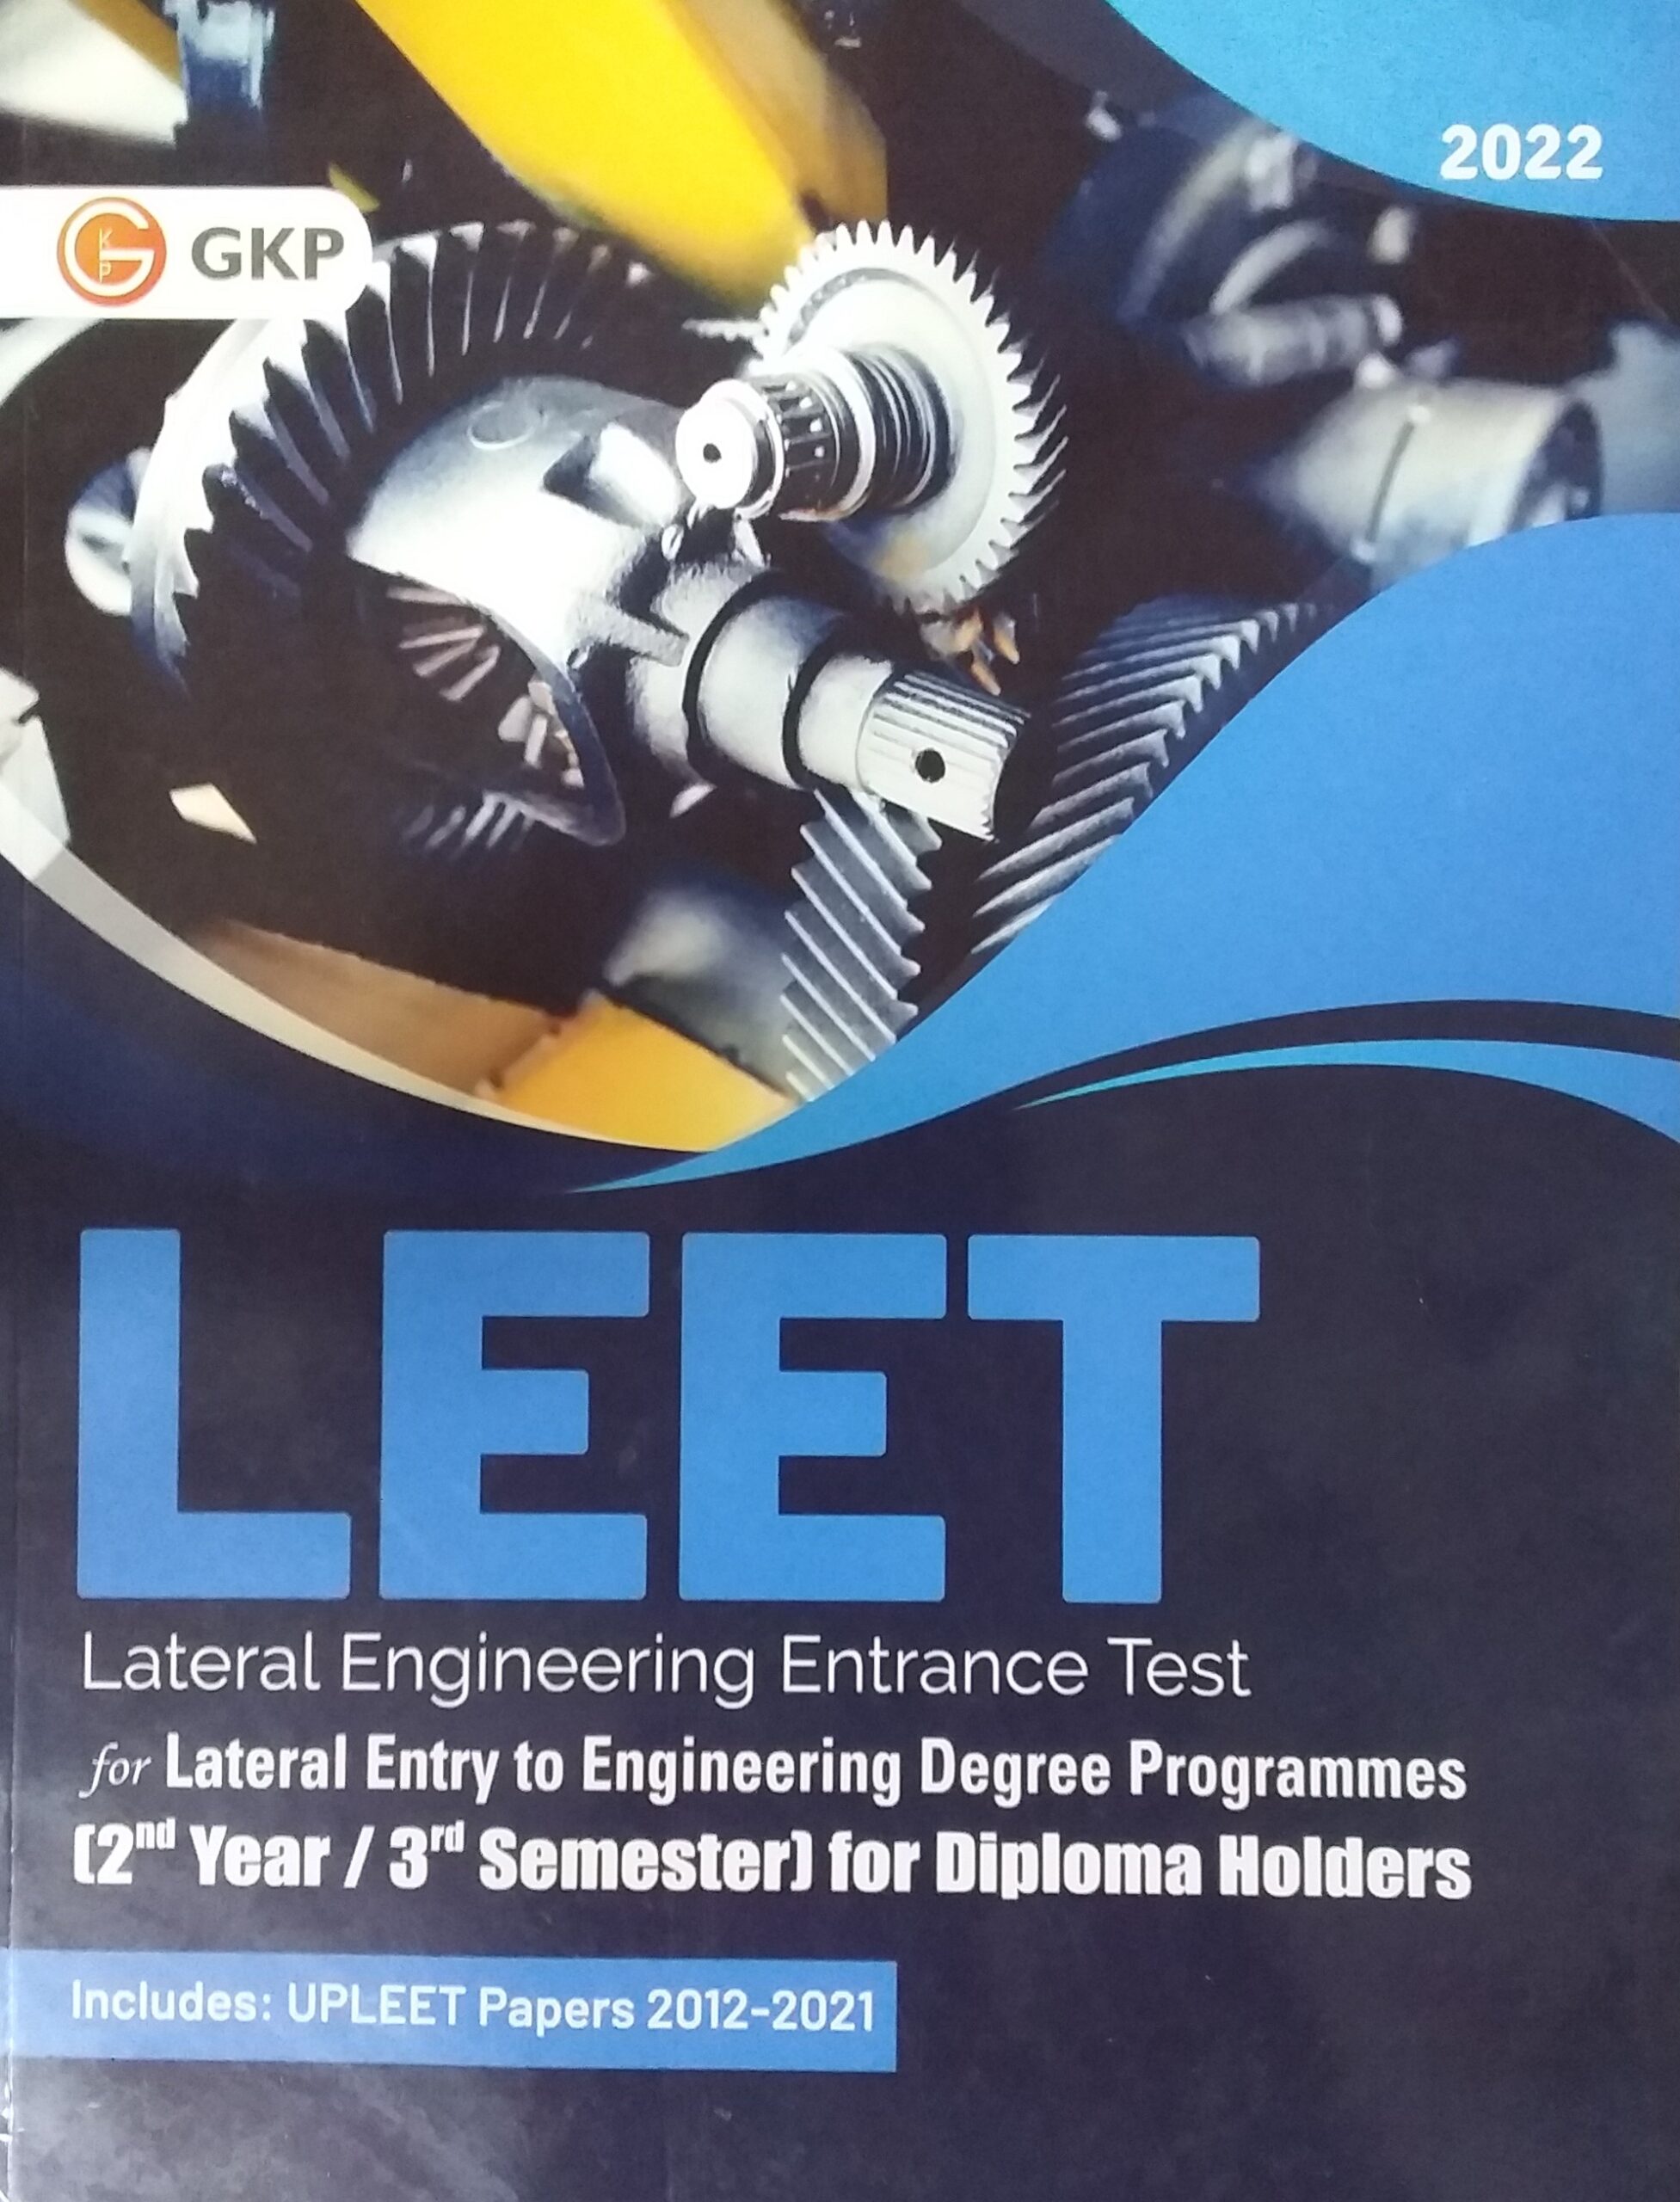 leet-for-lateral-entry-to-engineering-degree-programmes-2nd-year-3rd-semester-for-diploma